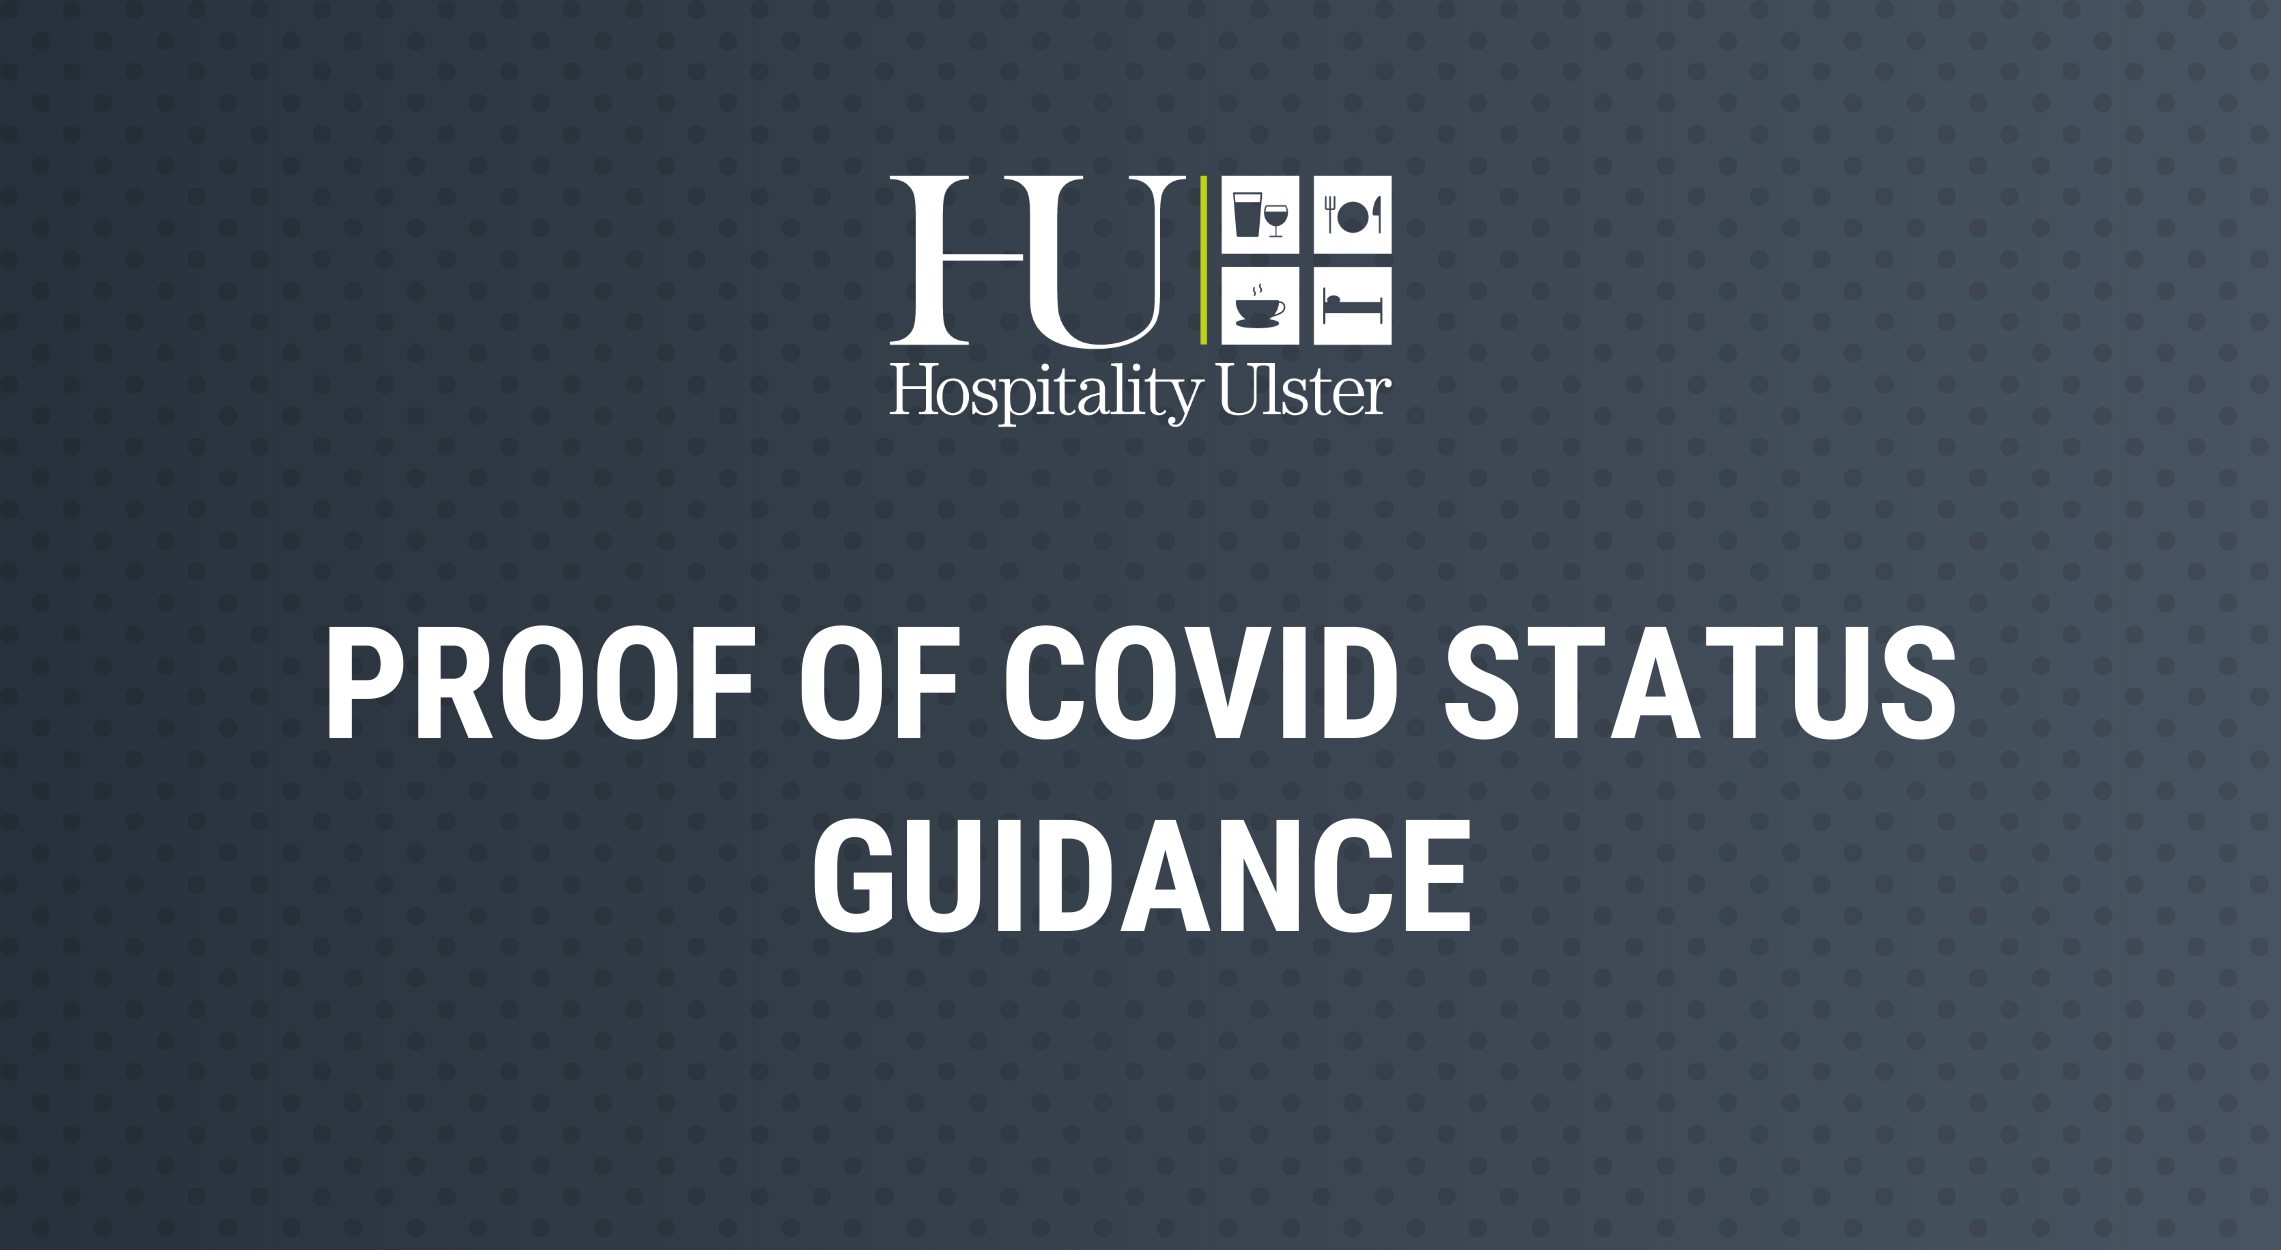 PROOF OF COVID STATUS GUIDANCE